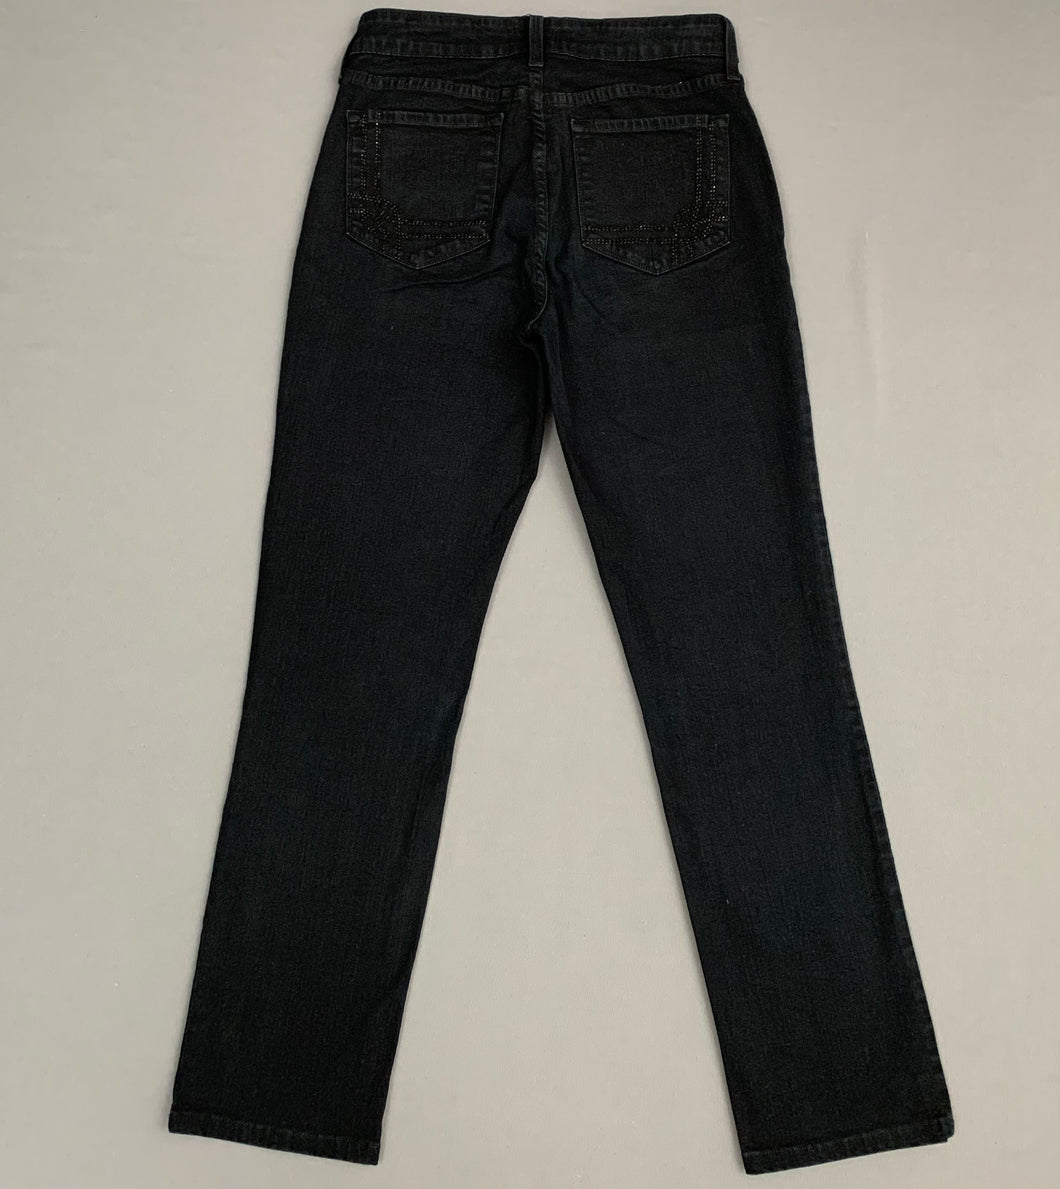 NYDJ Black SKINNY JEANS - Women's Size US 6 - UK 10 NOT YOUR DAUGHTERS JEANS